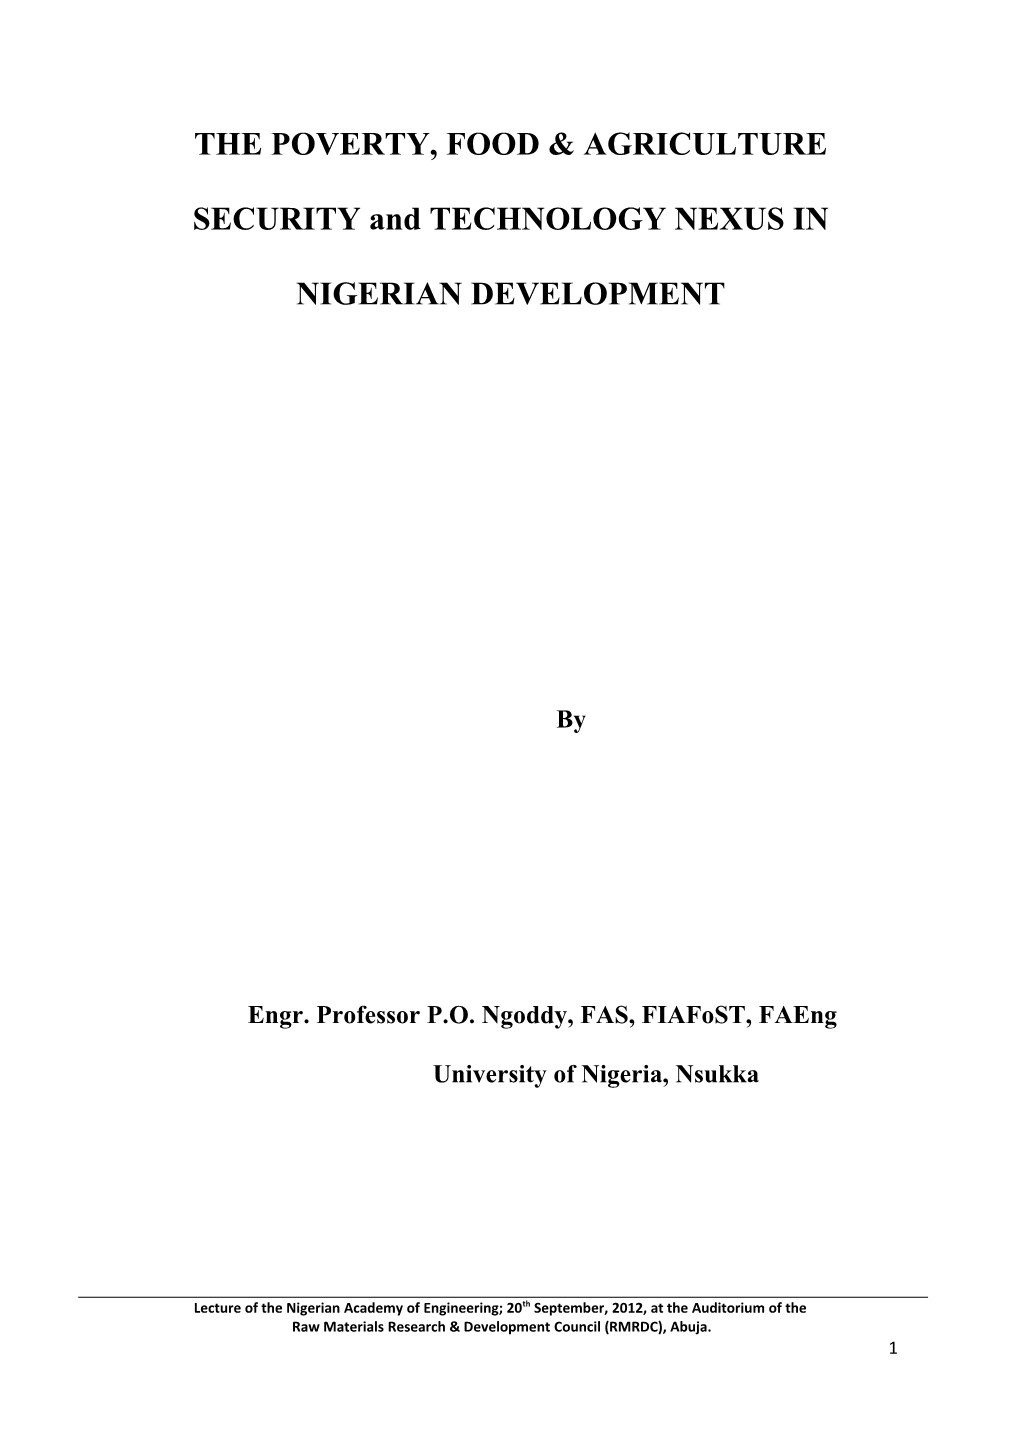 THE POVERTY, FOOD & AGRICULTURESECURITY and TECHNOLOGY NEXUS in NIGERIAN DEVELOPMENT